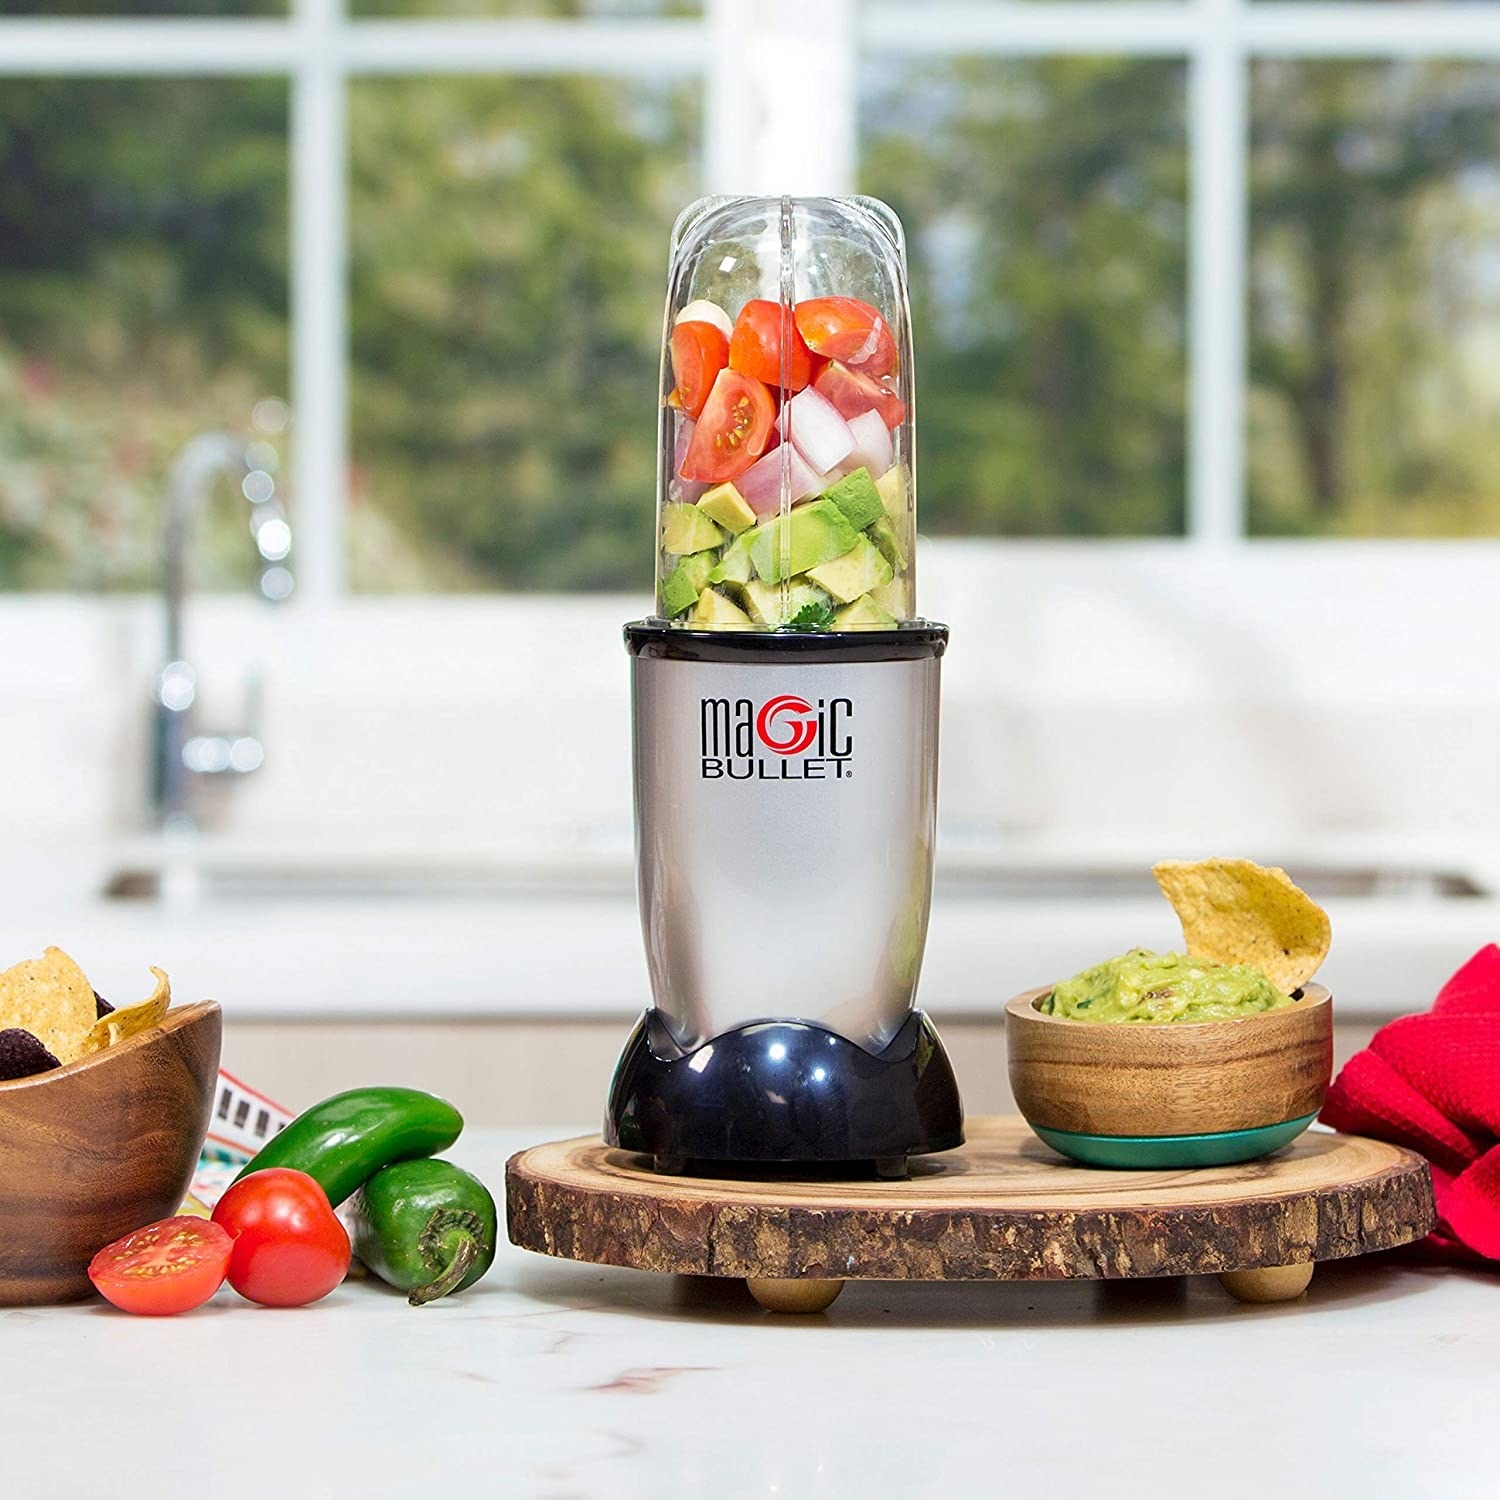 the magic bullet blender filled with all the ingredients to make guacamole